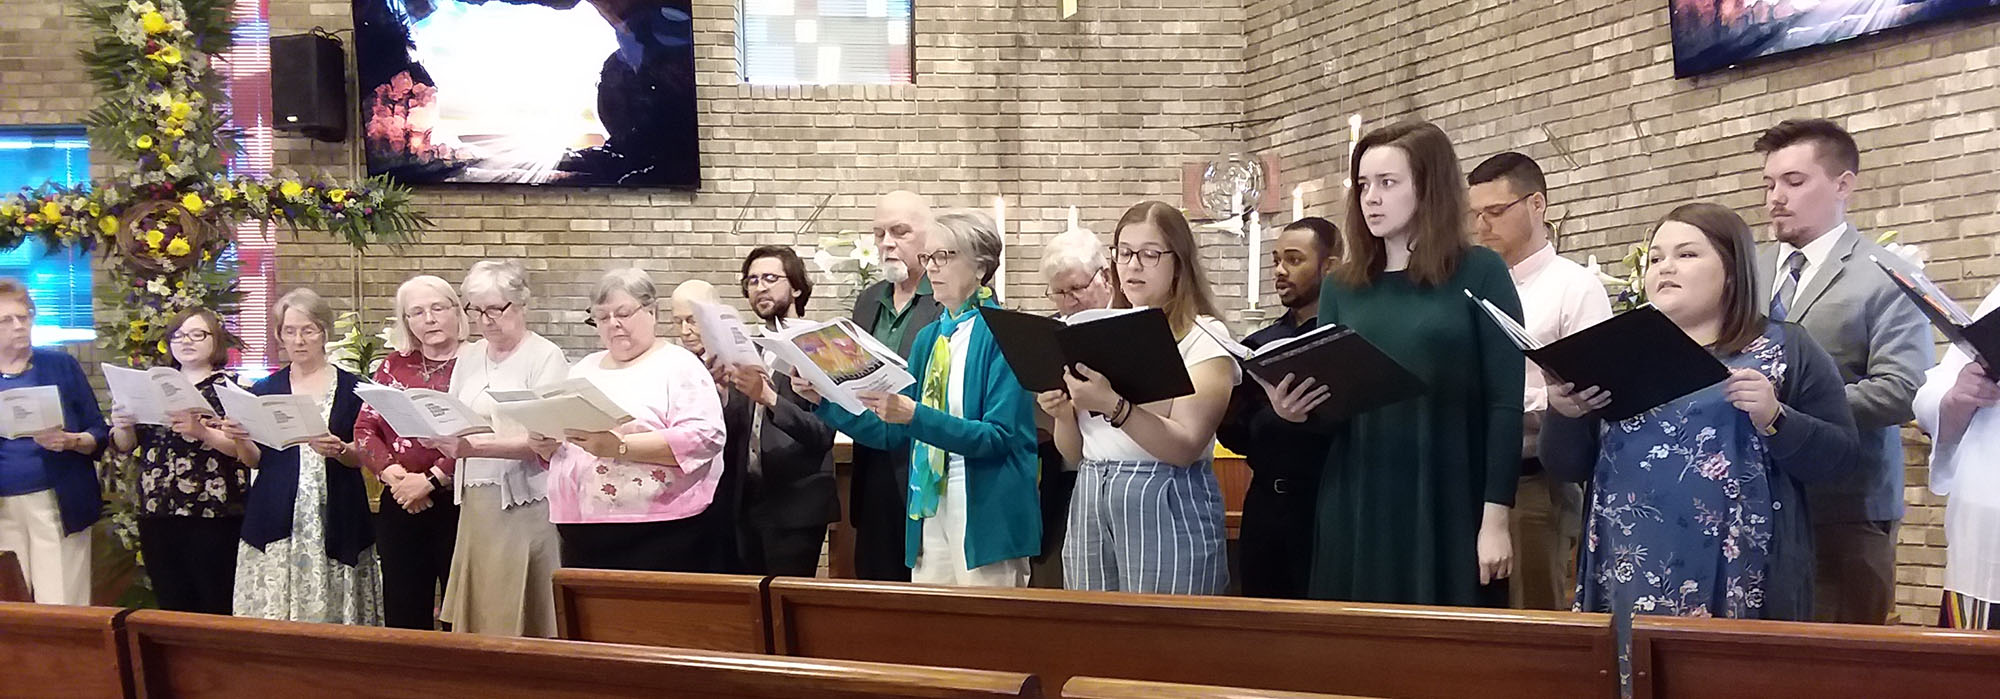 Full Choir Traditional Worship at Our Lord's Lutheran Church